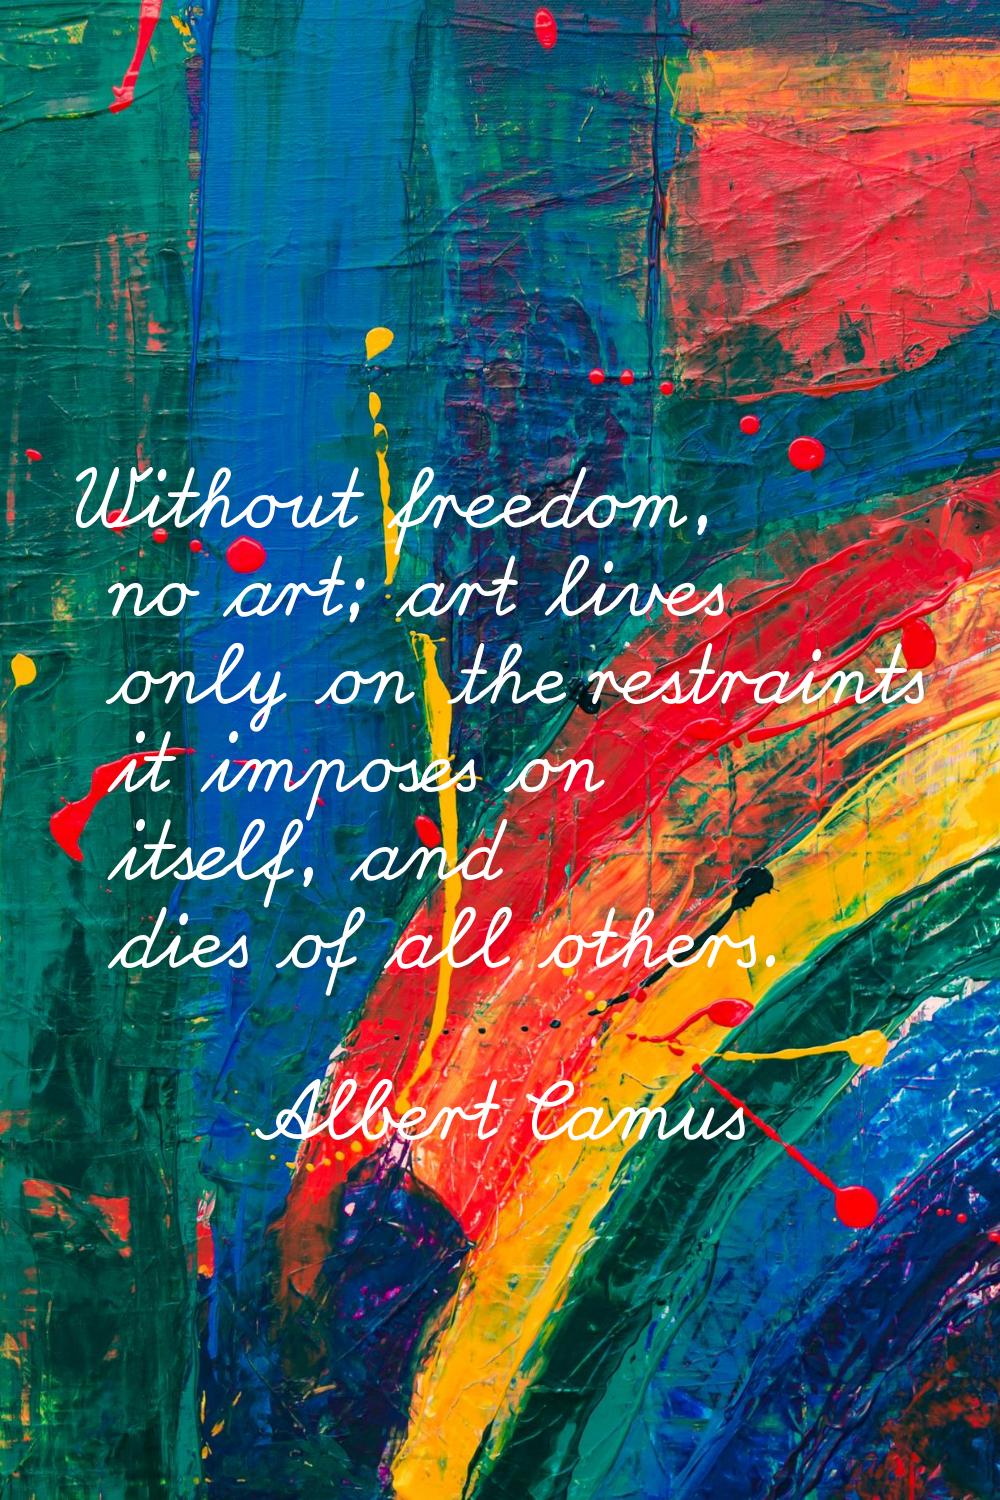 Without freedom, no art; art lives only on the restraints it imposes on itself, and dies of all oth